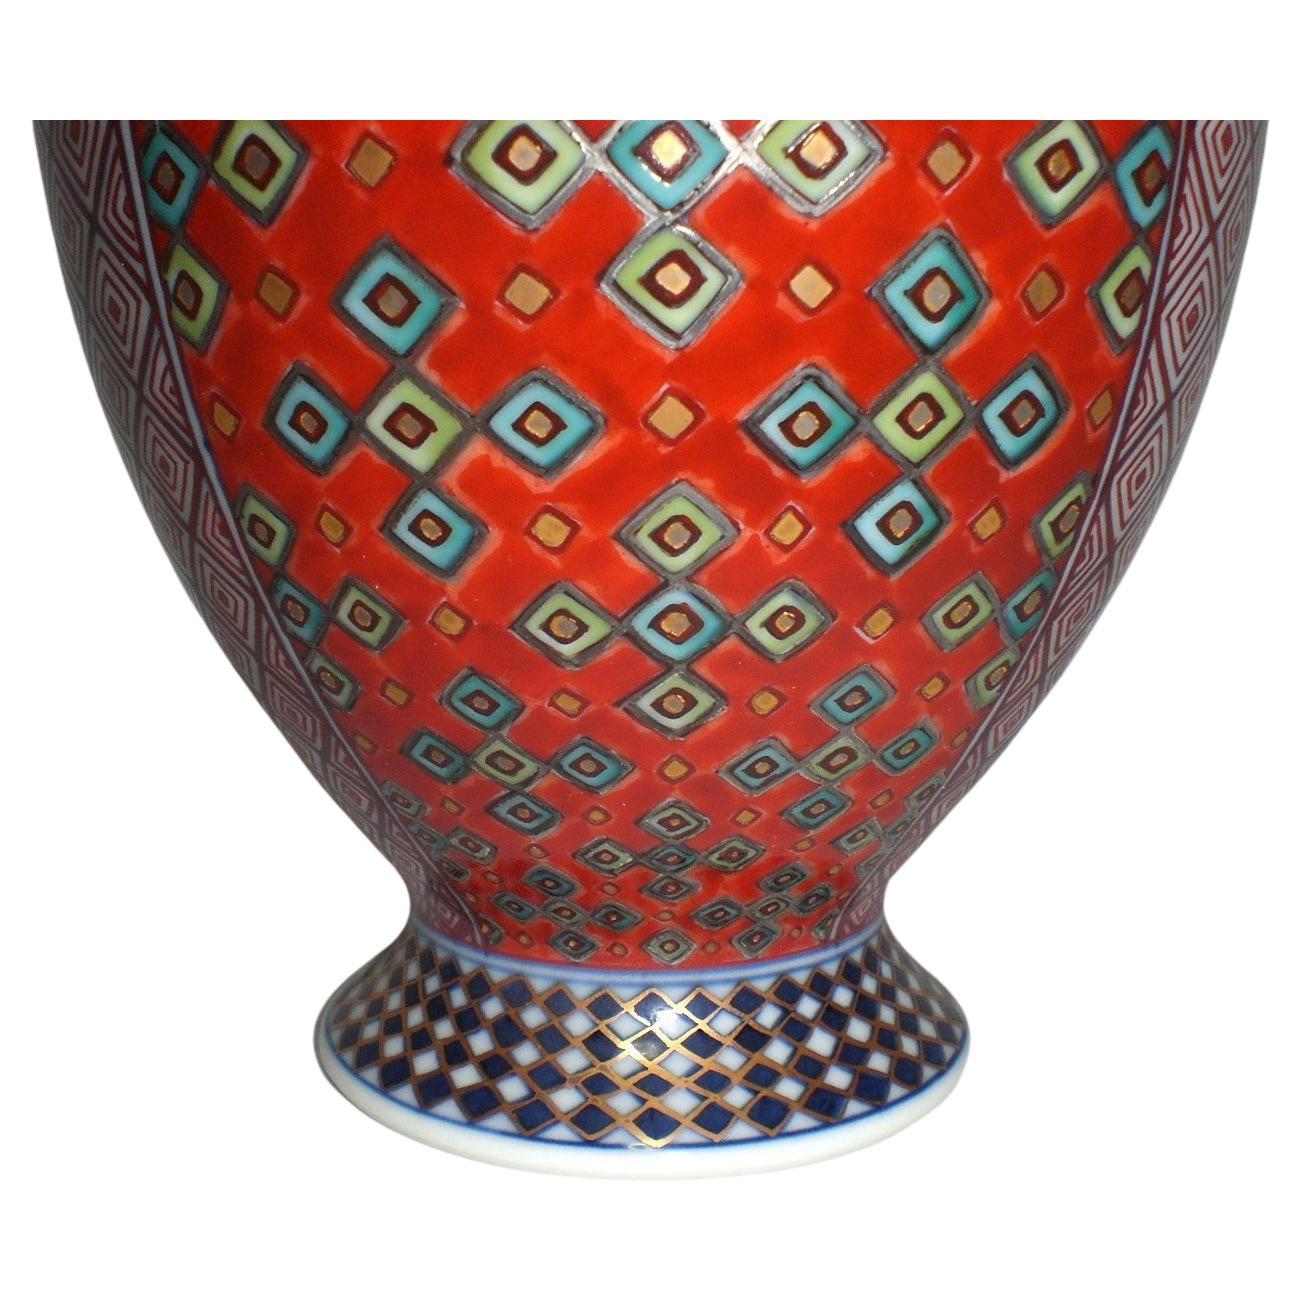 Exquisite Japanese contemporary decorative porcelain vase in an extraordinary shape featuring two fascinating and detailed geometric progression patterns extremely intricately hand painted in red and blue, a signed masterpiece by a highly acclaimed